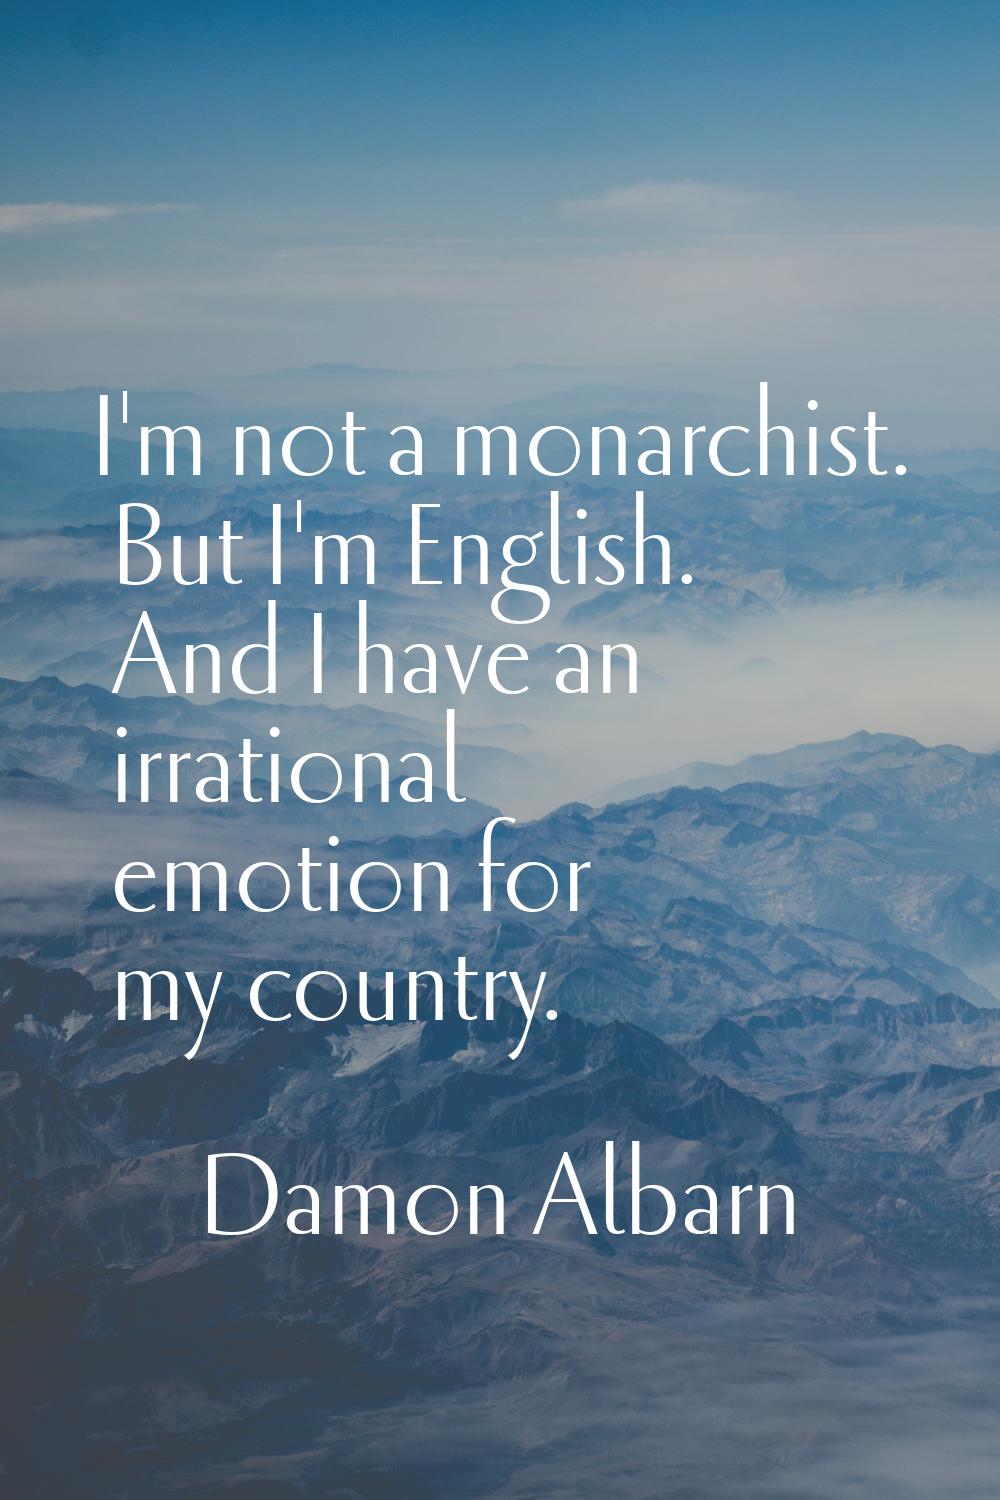 I'm not a monarchist. But I'm English. And I have an irrational emotion for my country.